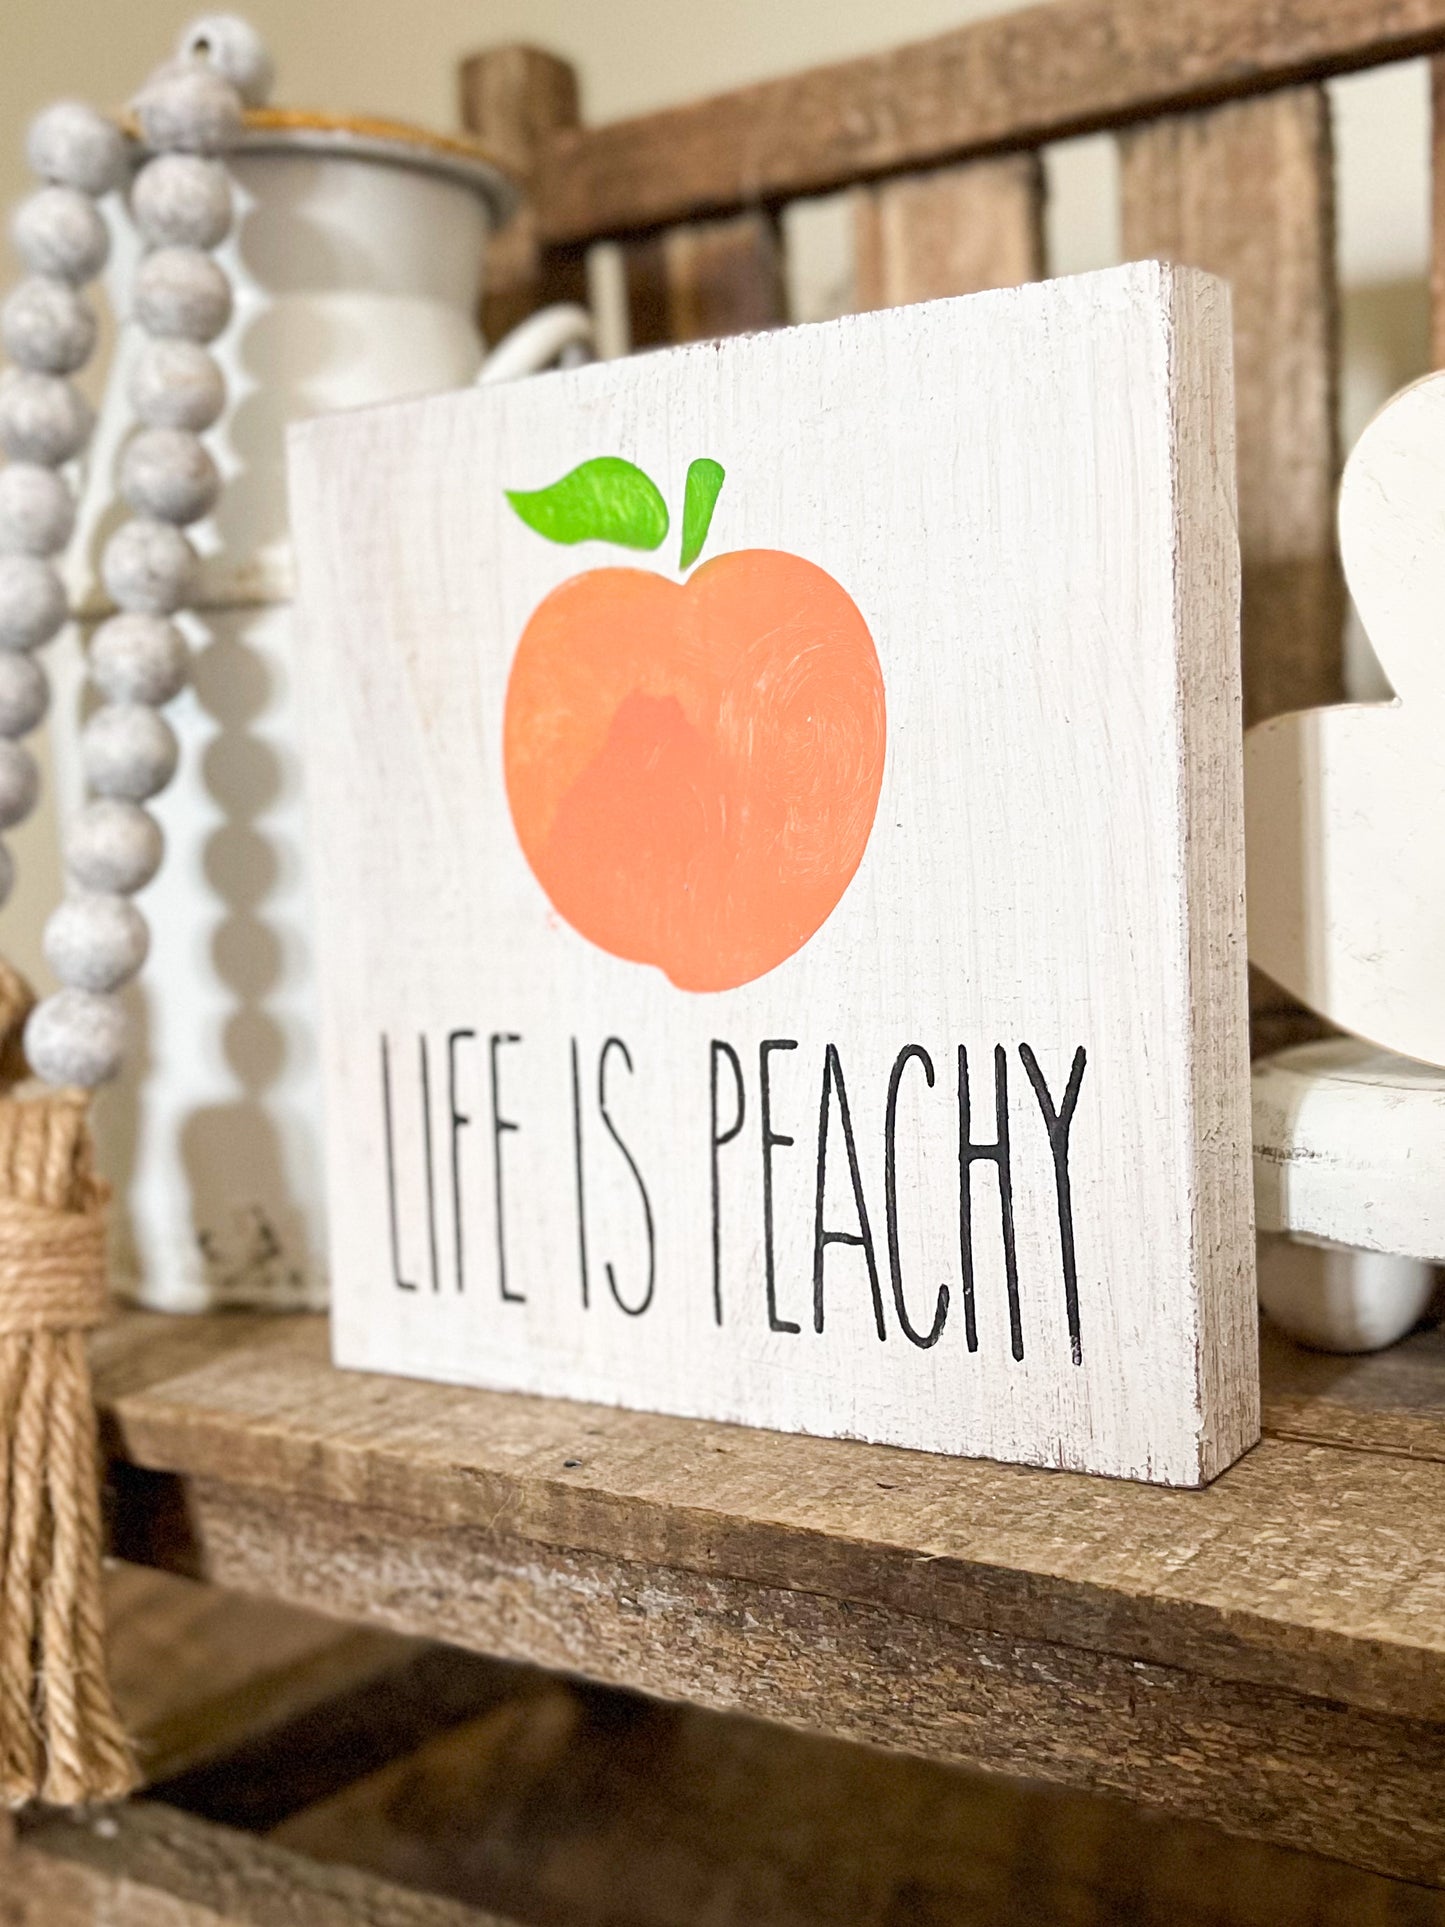 Life is peachy sign